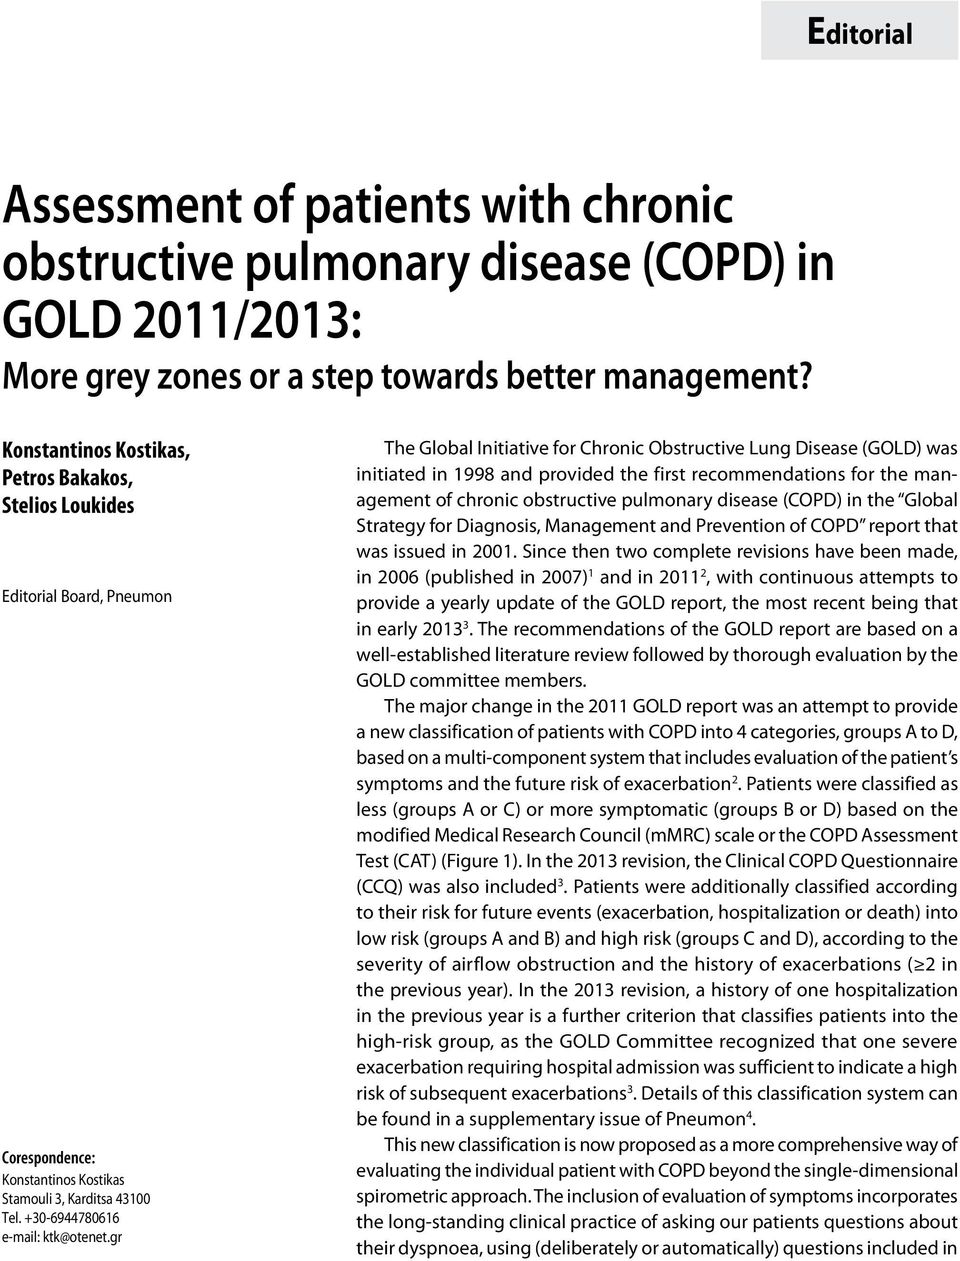 gr The Global Initiative for Chronic Obstructive Lung Disease (GOLD) was initiated in 1998 and provided the first recommendations for the management of chronic obstructive pulmonary disease (COPD) in